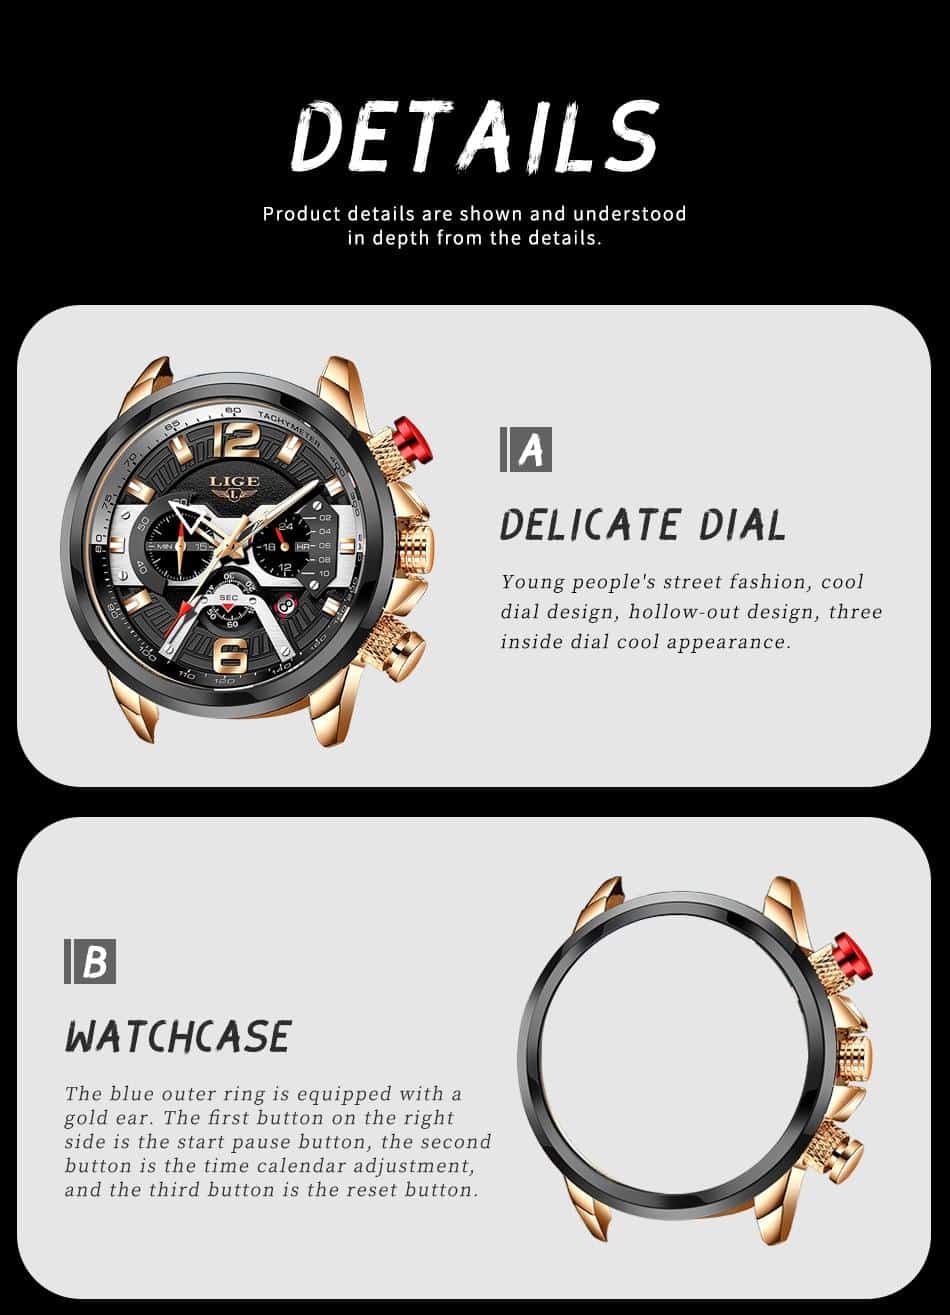 2021 New Mens Watches LIGE Top Brand Leather Chronograph Waterproof Sport Automatic Date Quartz Watch For Men Relogio Masculino